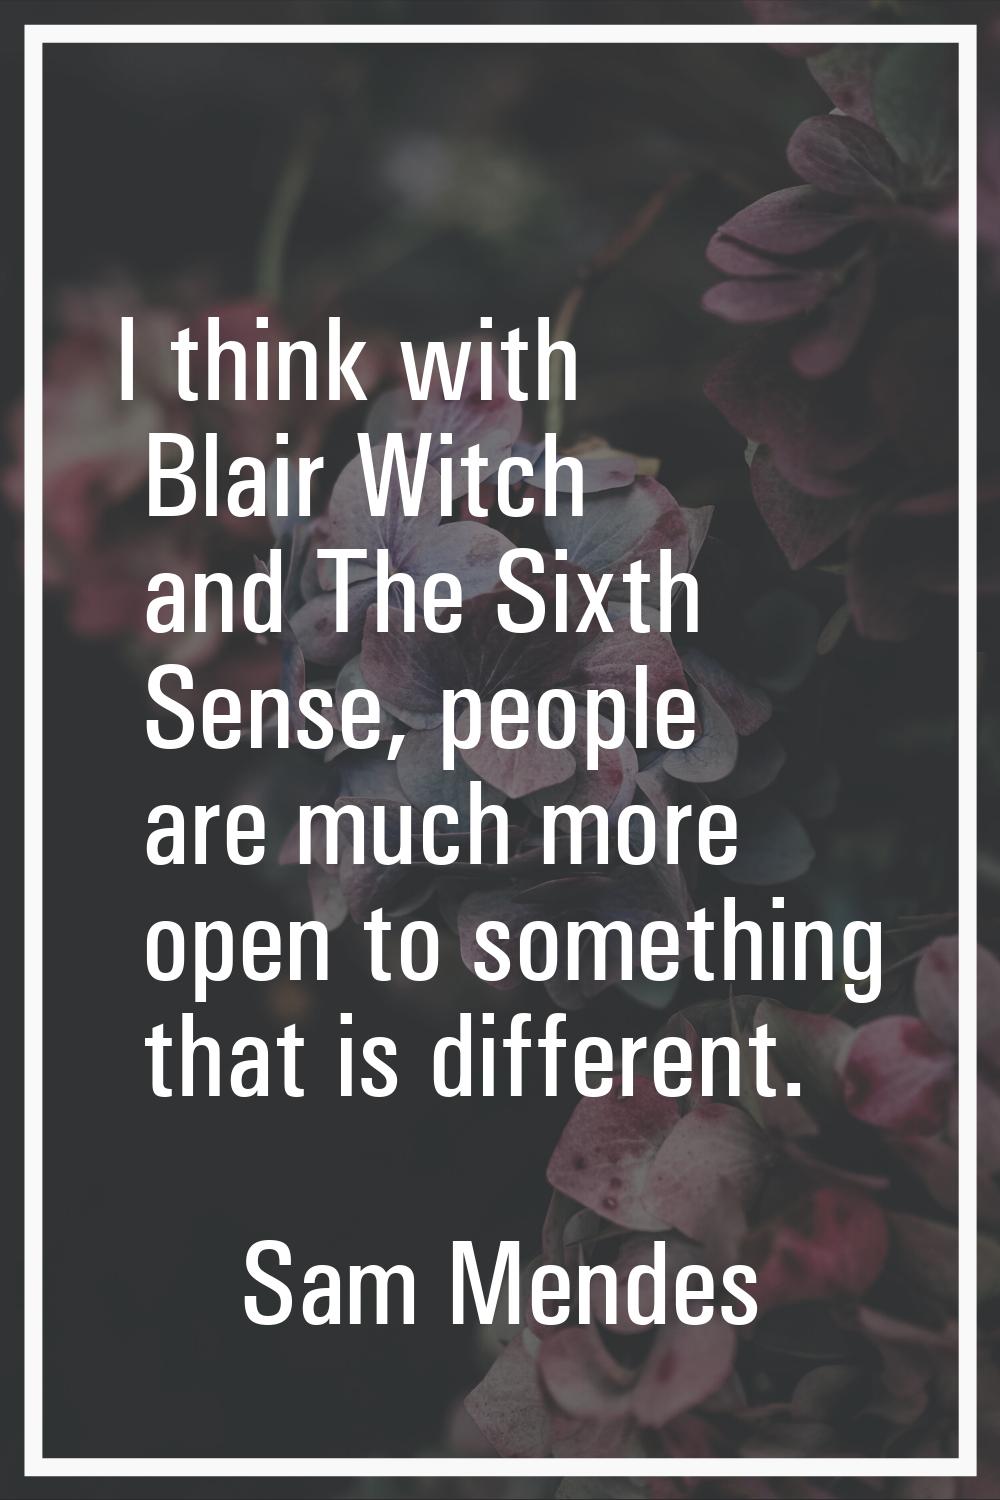 I think with Blair Witch and The Sixth Sense, people are much more open to something that is differ